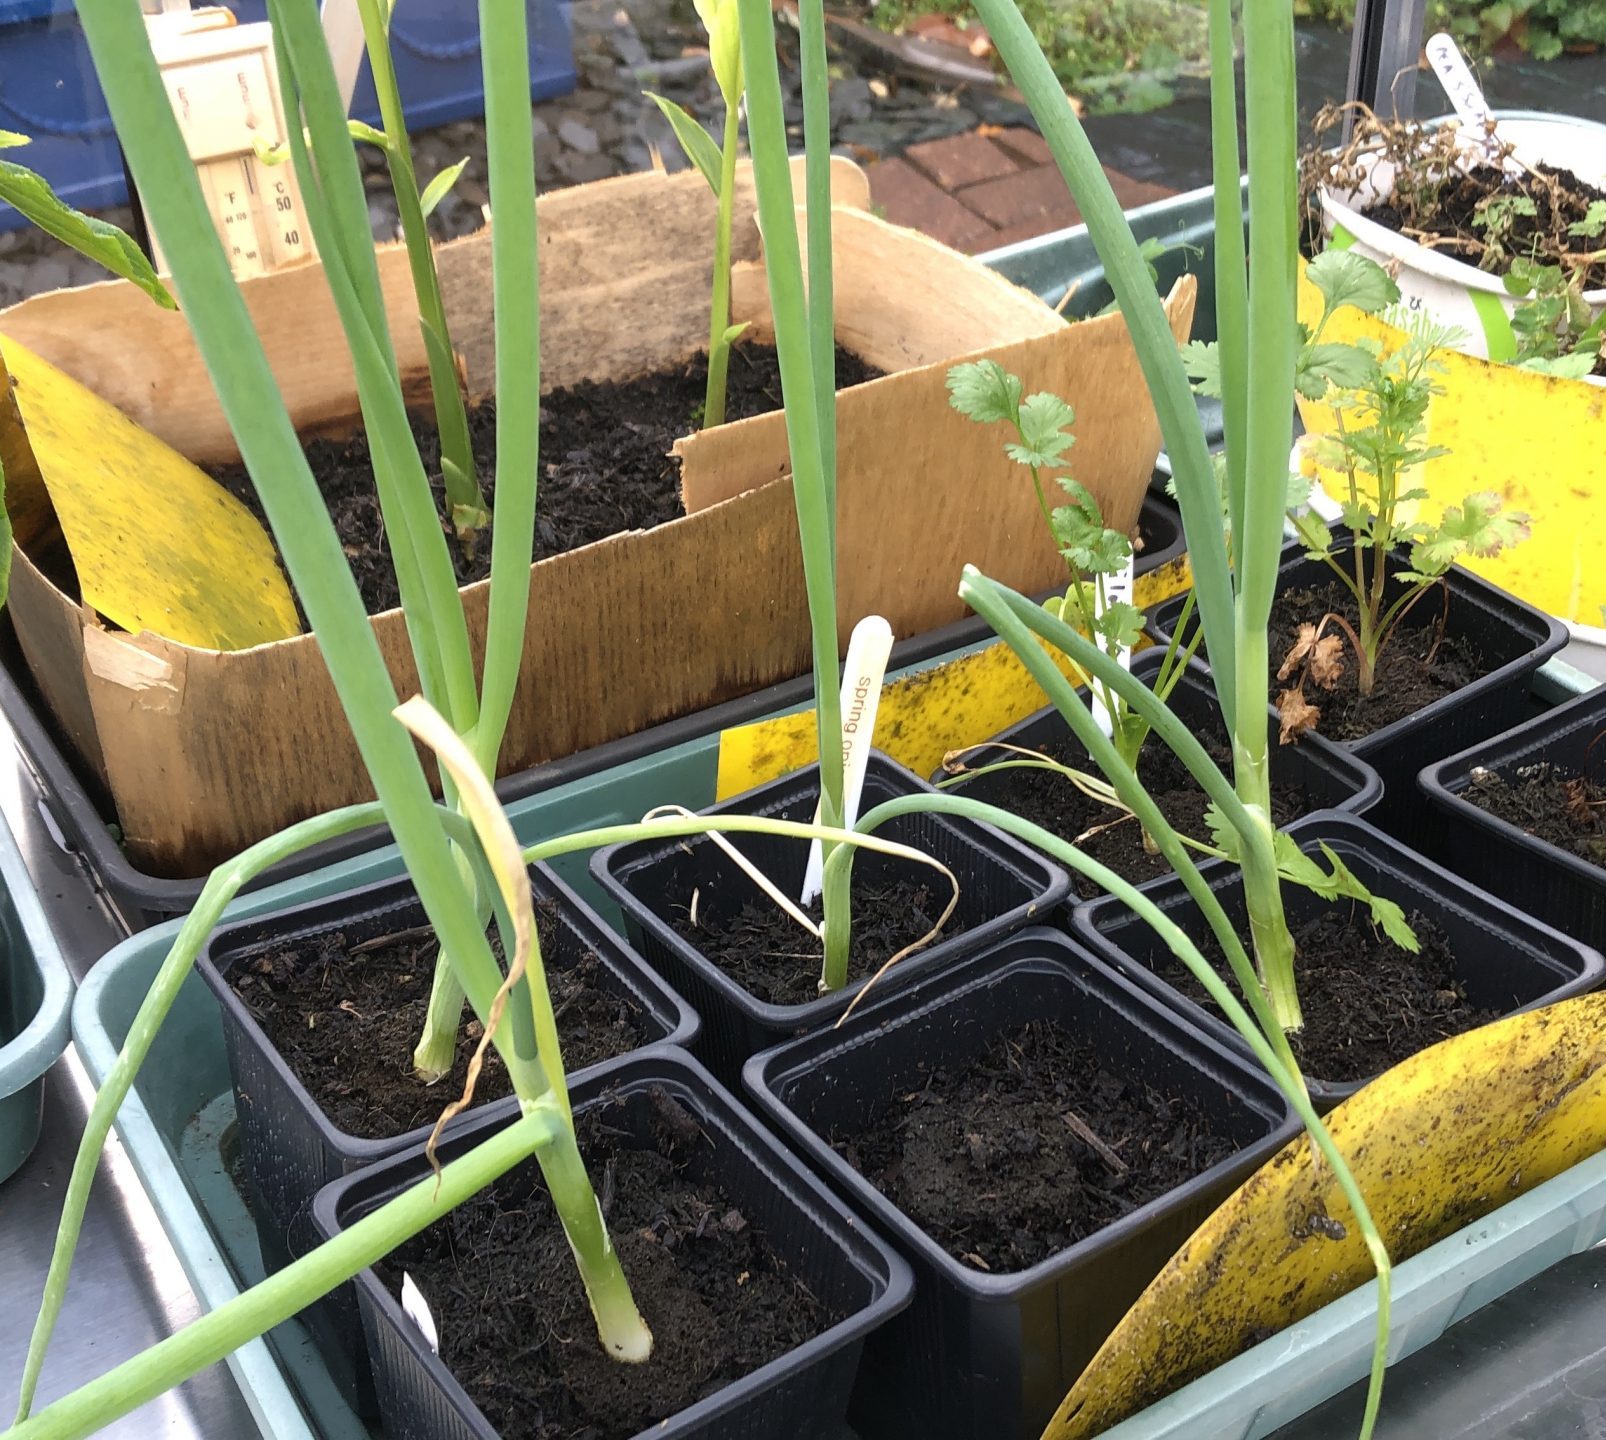 Spring onions growing in greenhouse - 31/10/20